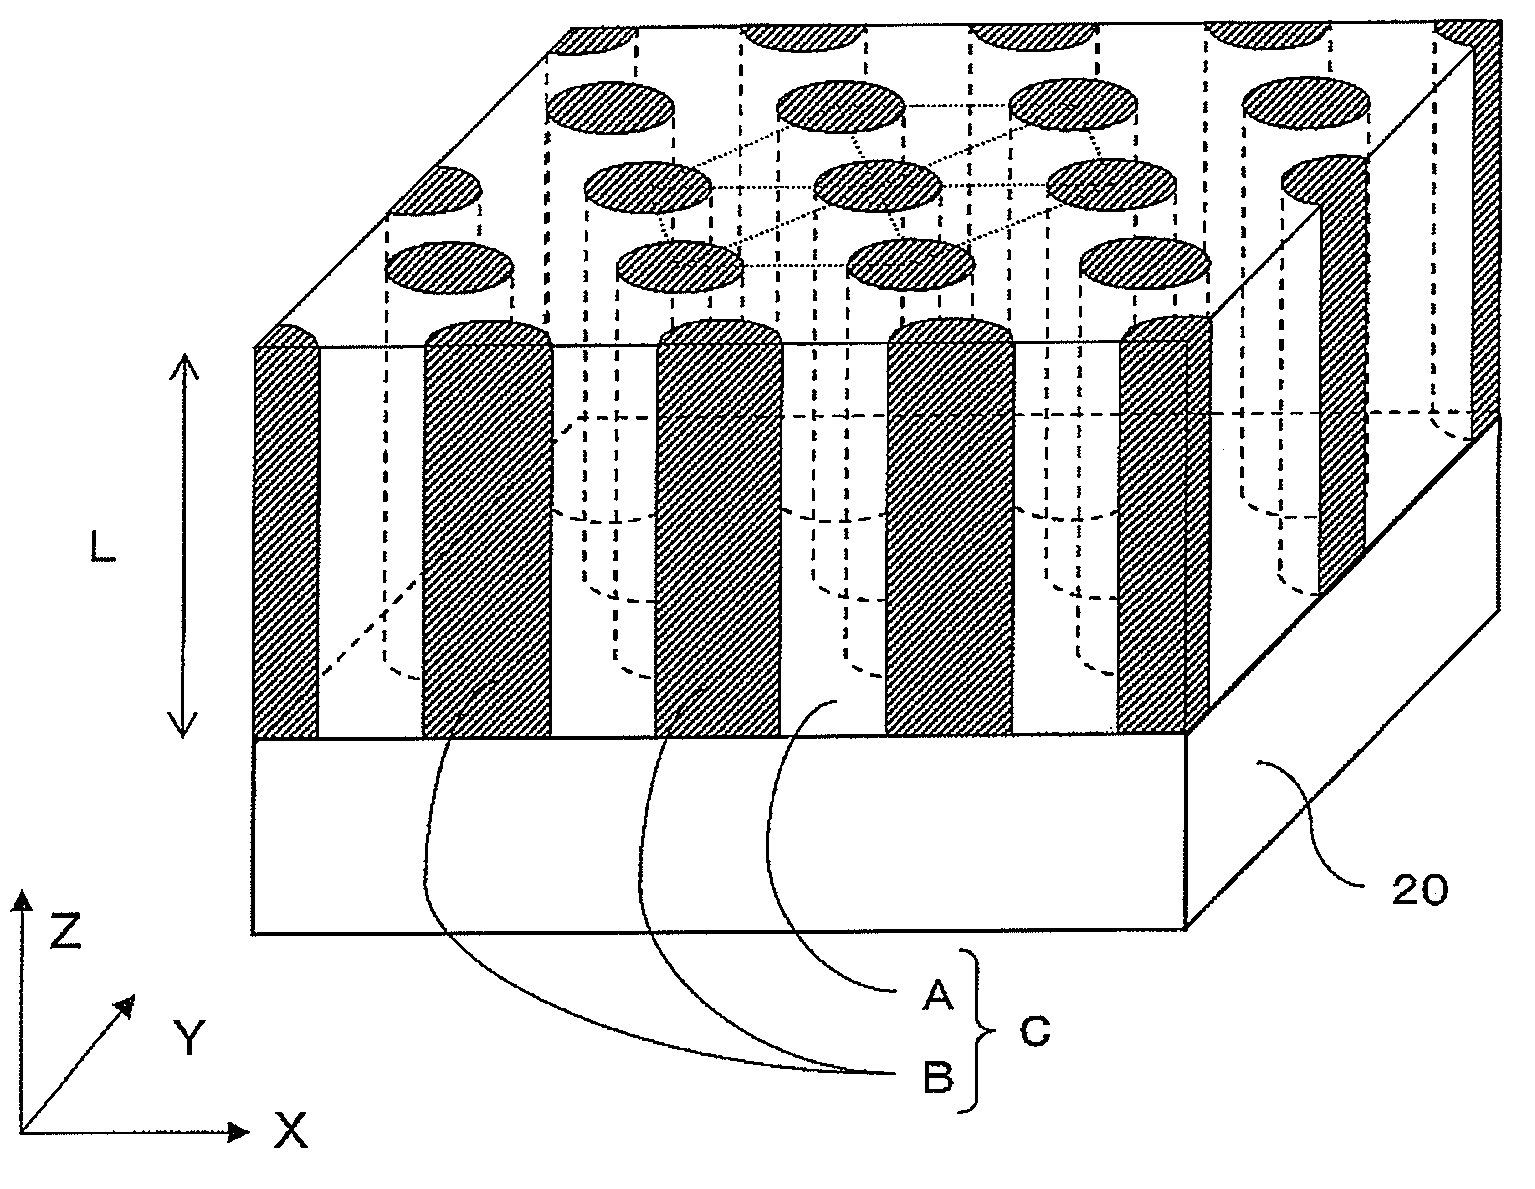 Polymer Thin Film, Patterned Substrate, Patterned Medium for Magnetic Recording, and Method of Manufacturing these Articles